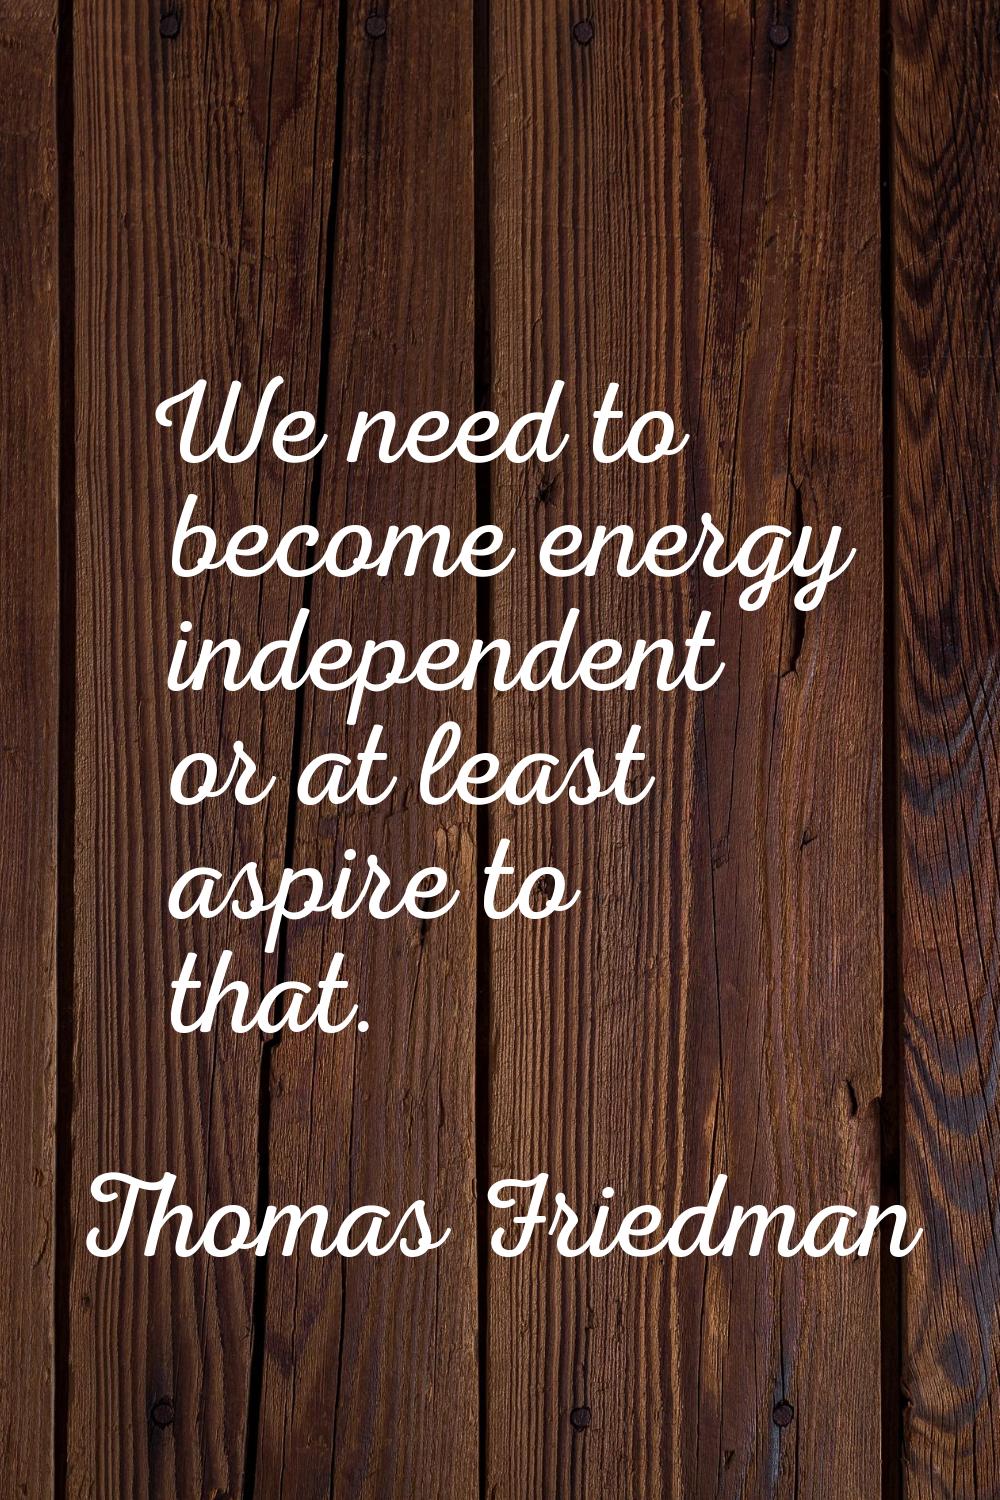 We need to become energy independent or at least aspire to that.